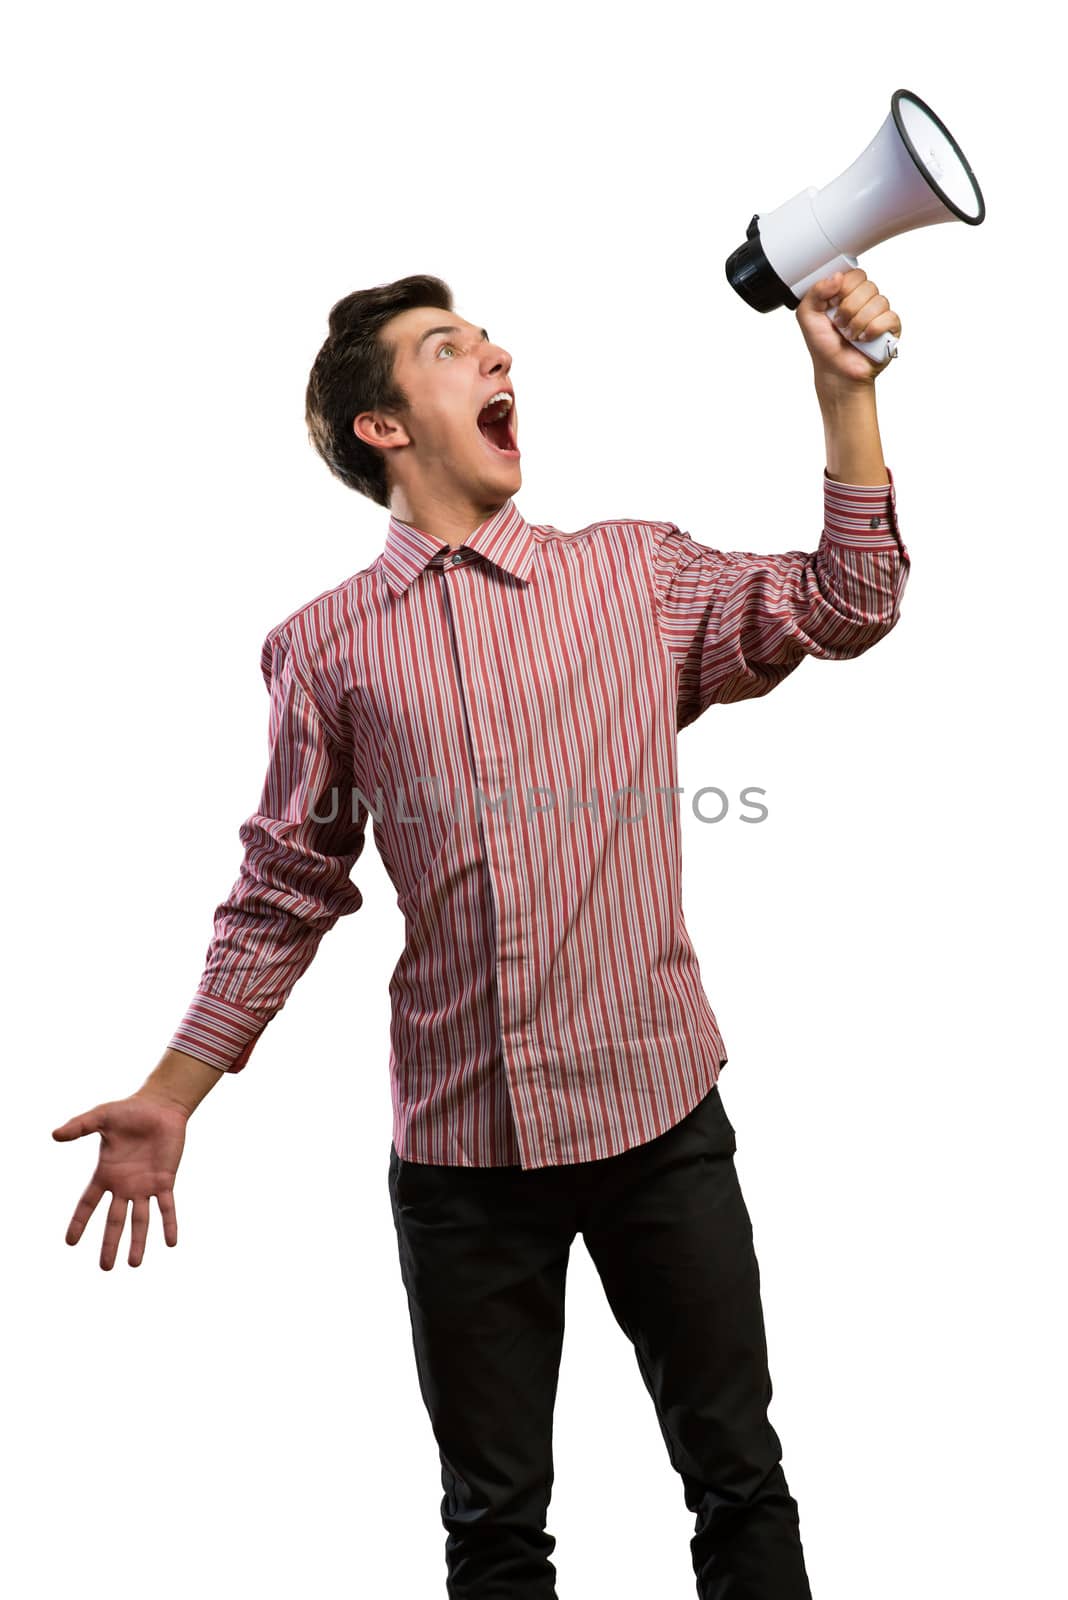 man shouts through a megaphone. isolated on white background